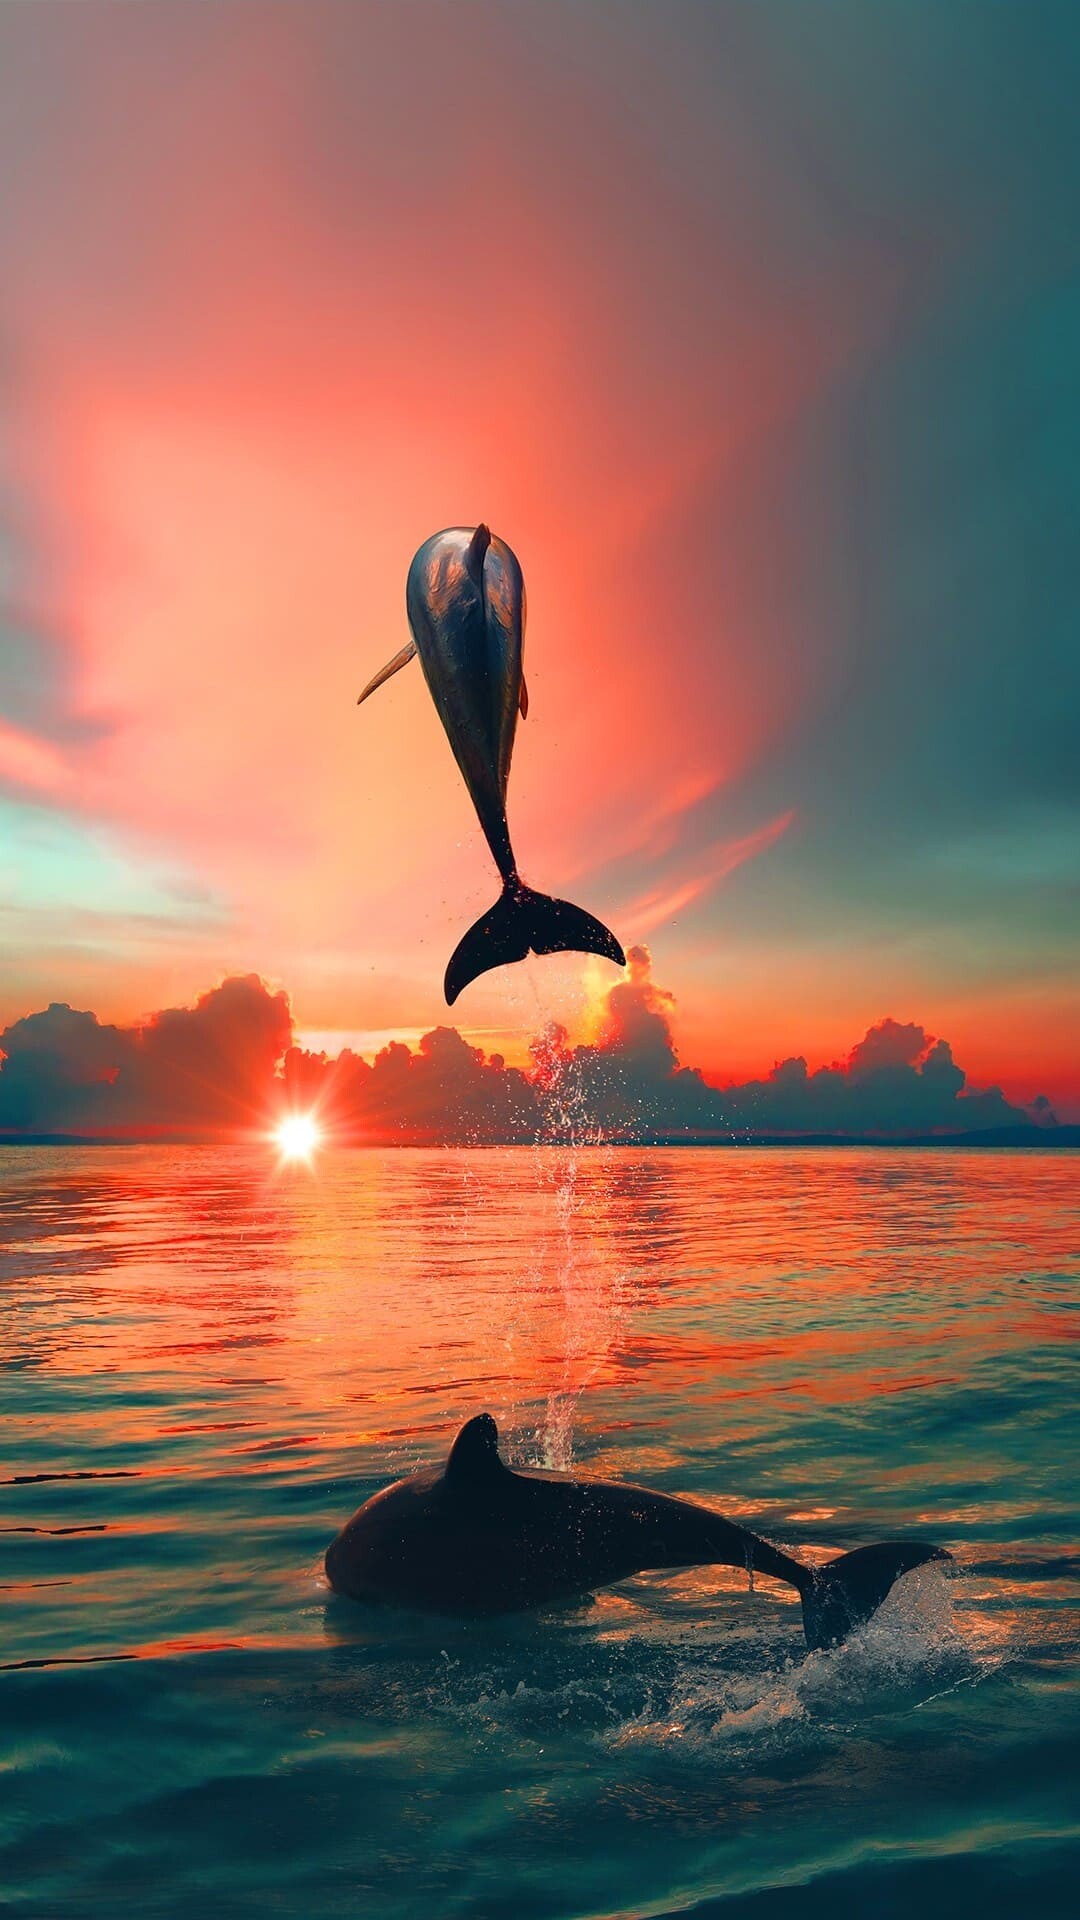 Dolphin: Dolphins can live in either fresh or salt water. 1080x1920 Full HD Wallpaper.